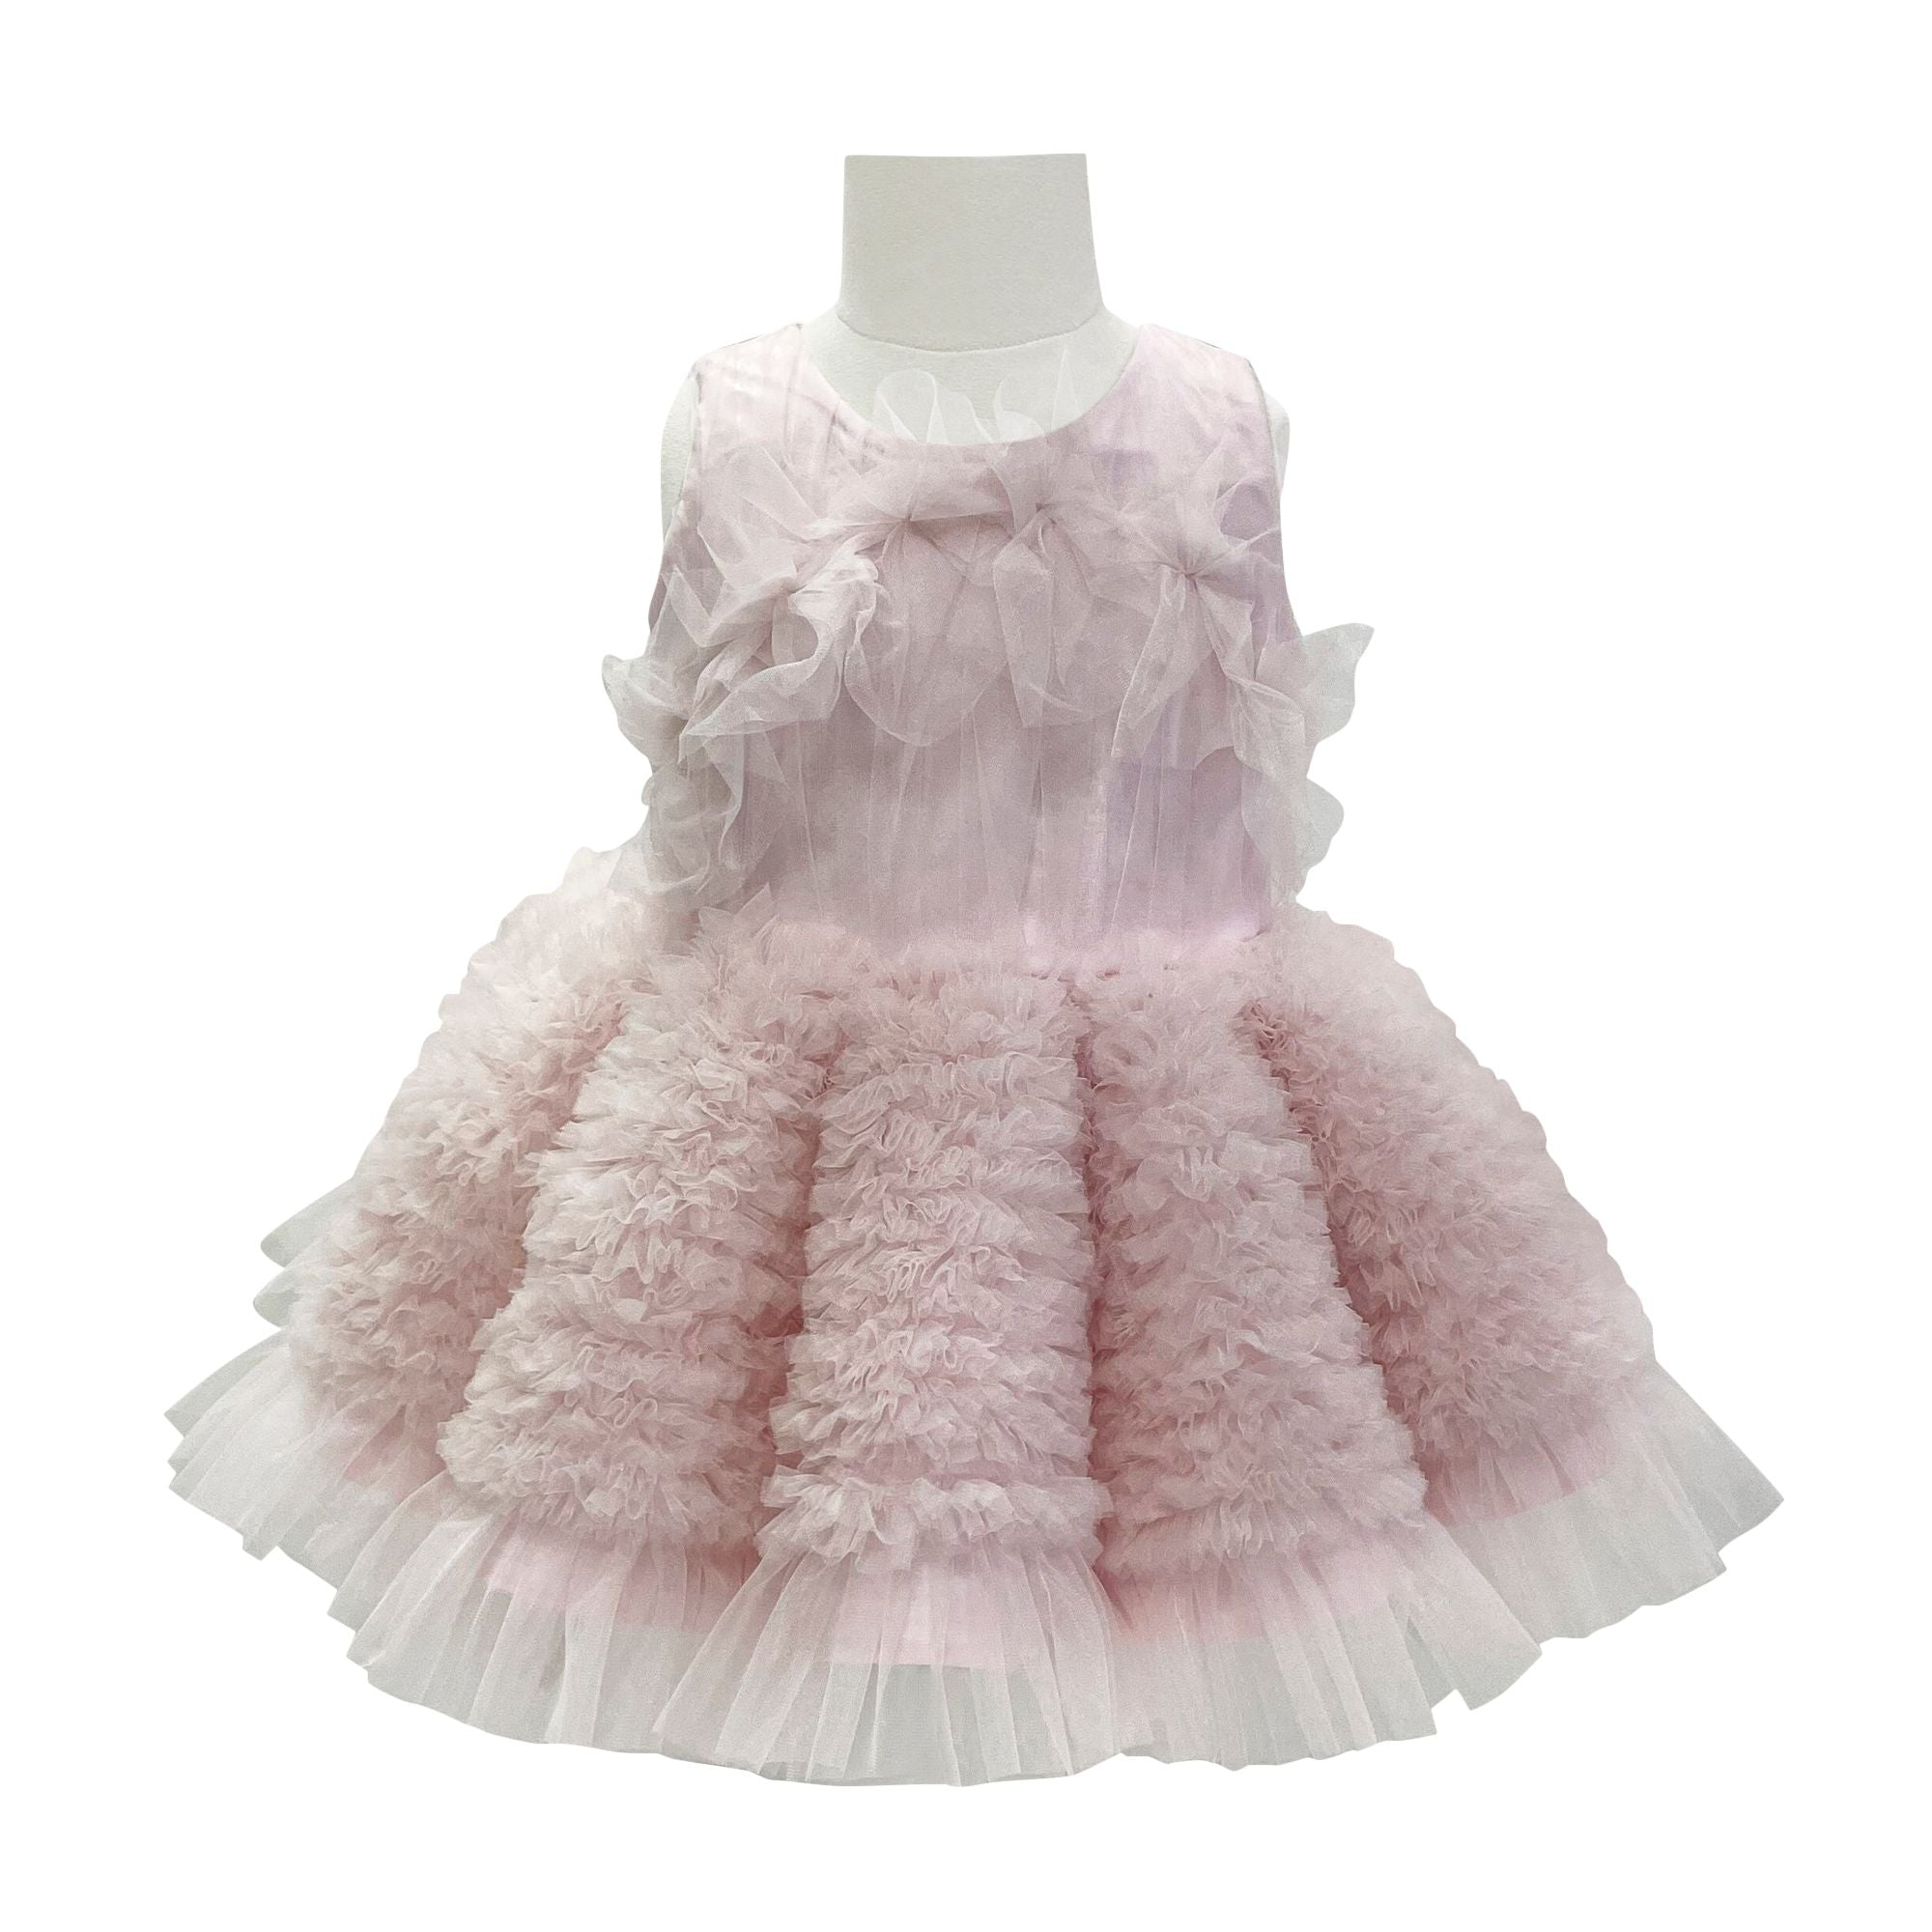 The Ariel Tulle Dress (Pink)